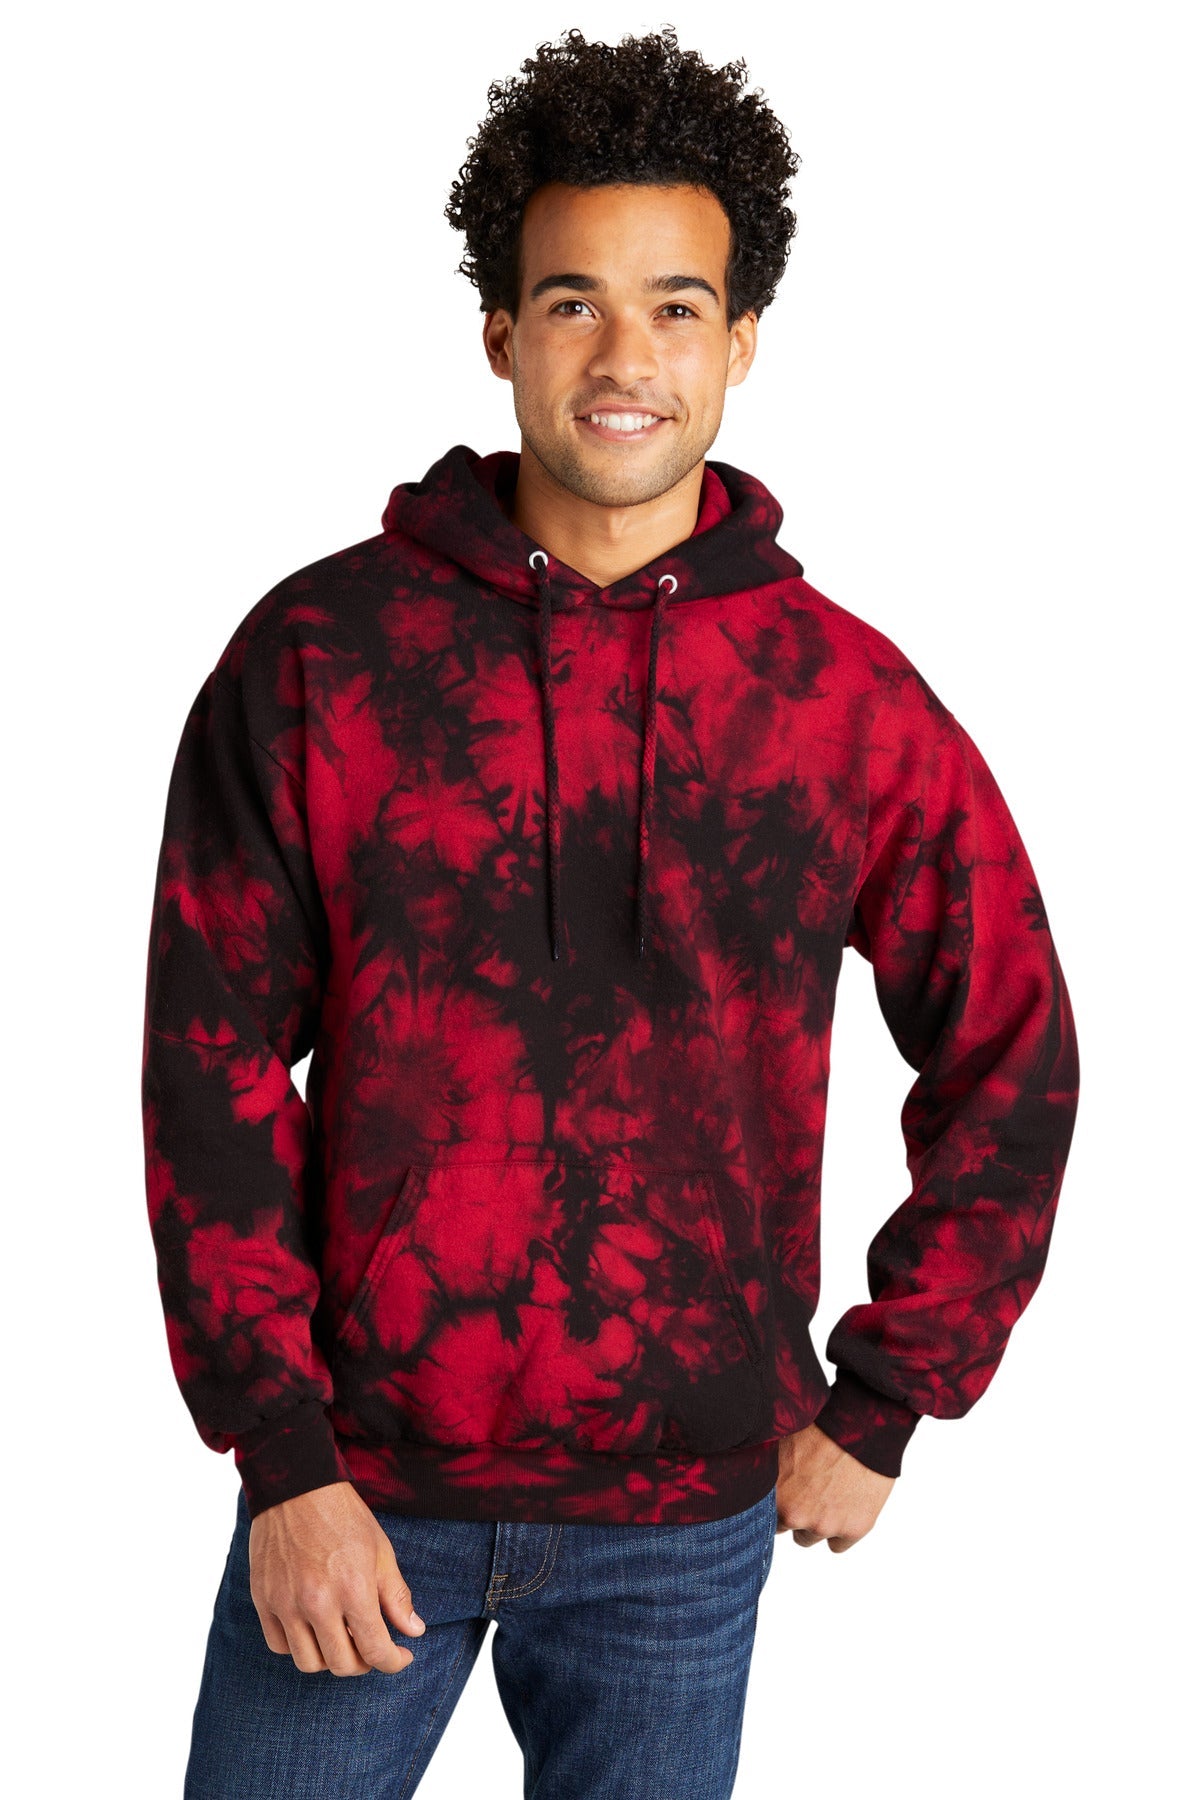 Port & Company® Crystal Tie-Dye Pullover Hoodie PC144 - DFW Impression